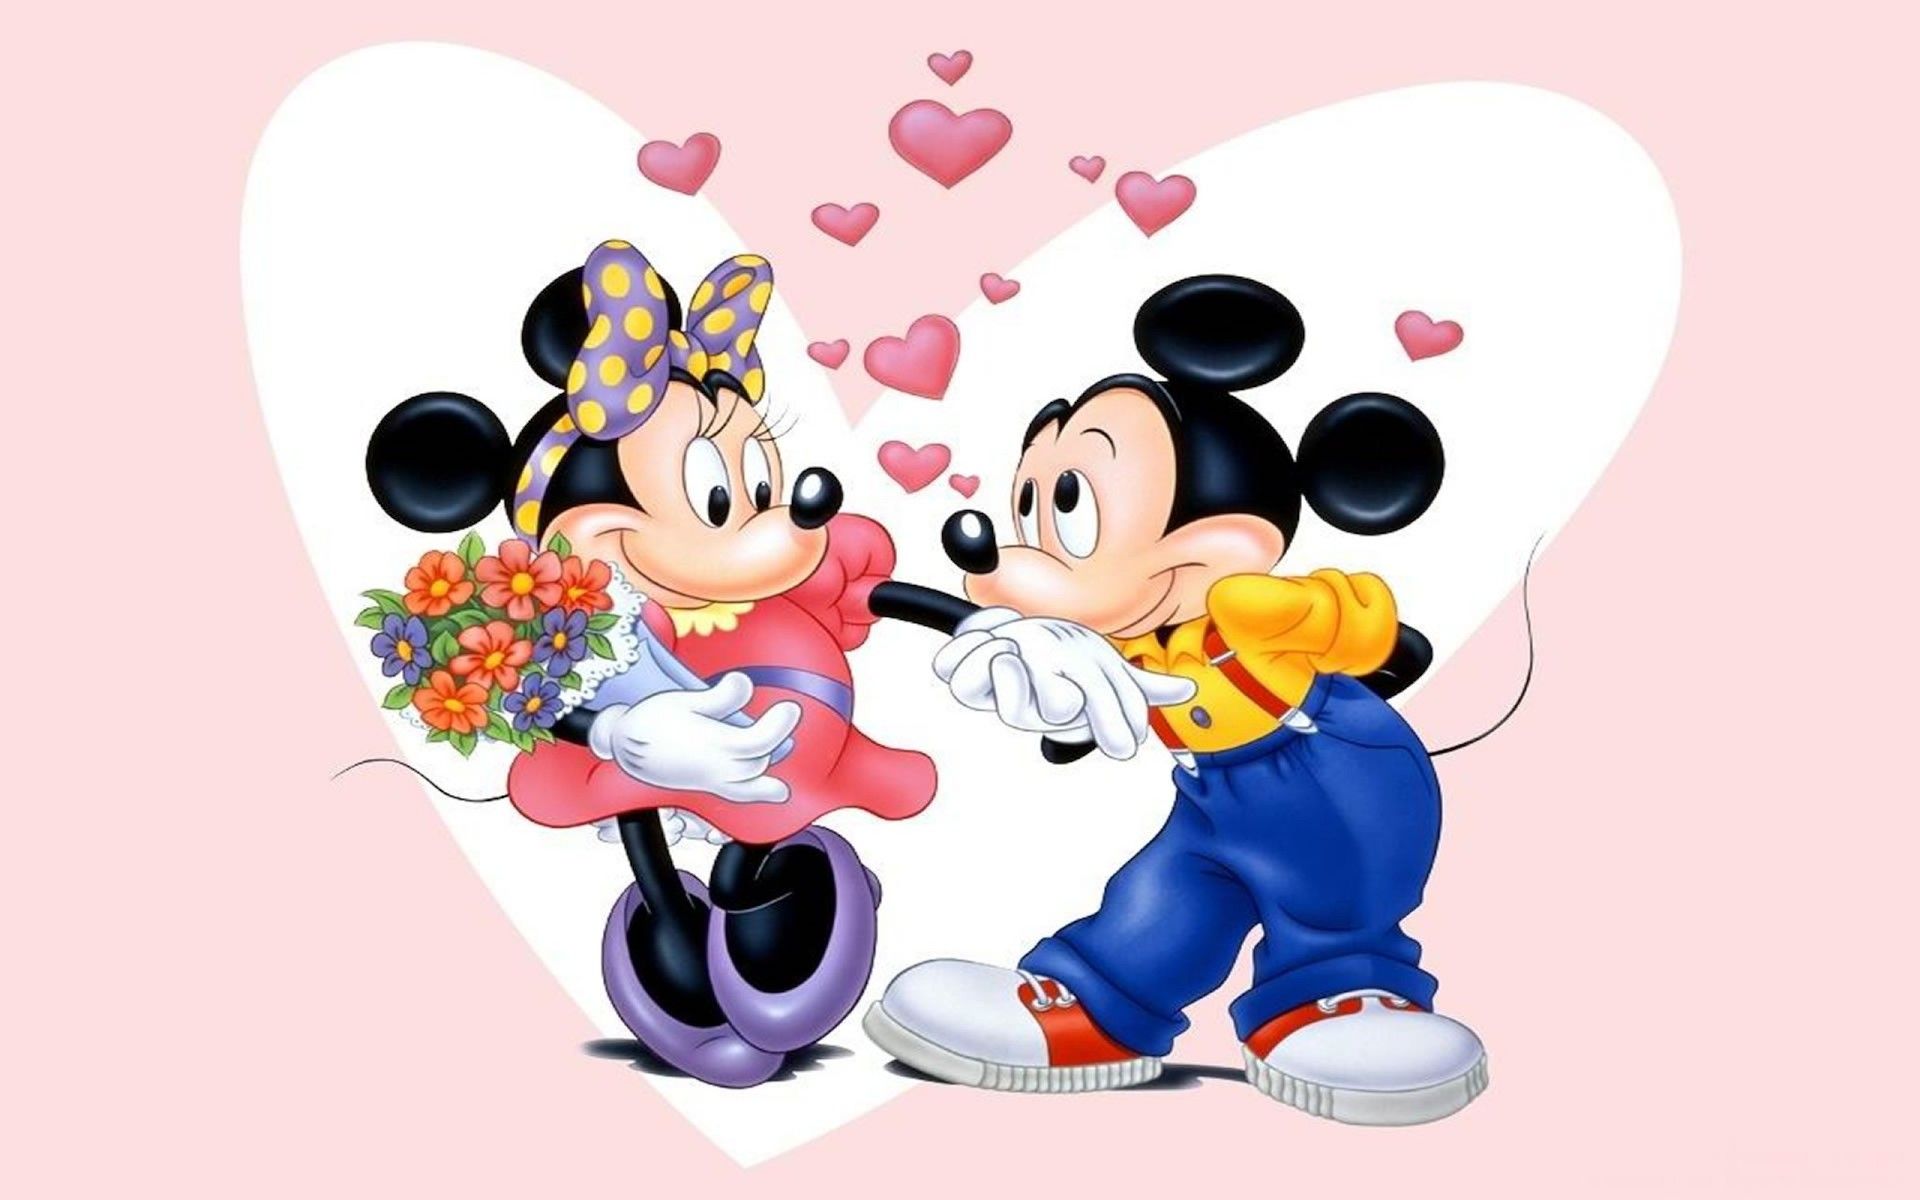 1920x1200 Free Mickey Mouse And Minnie Mouse Love, Download Free Clip Art on WallpaperBat